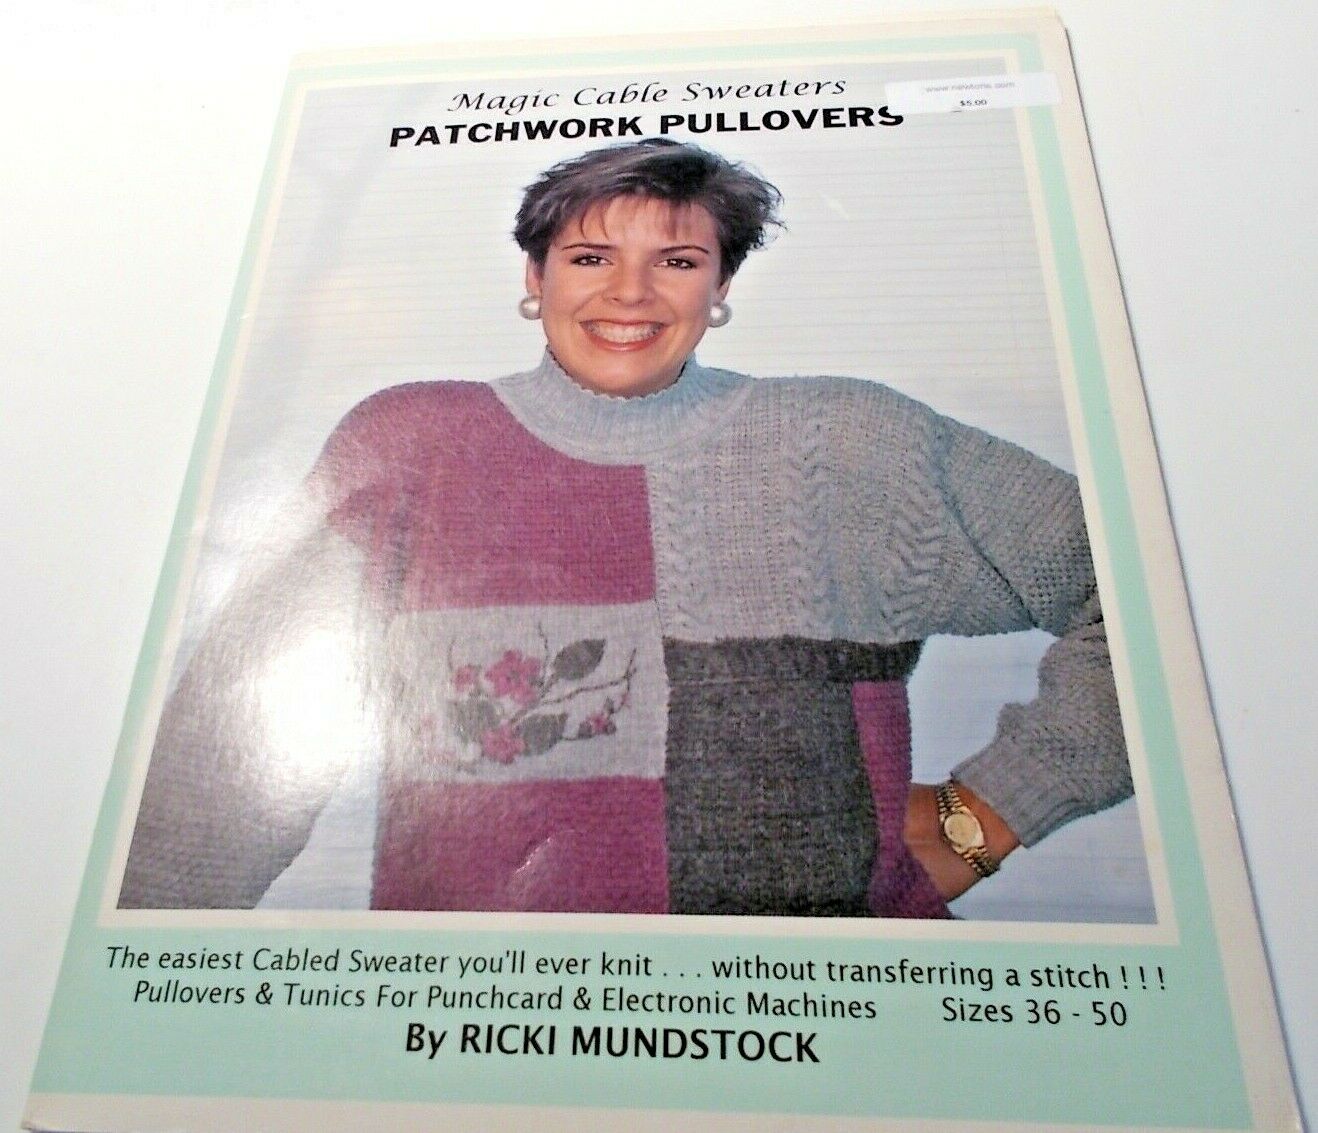 Magic Cable Sweaters Patchwork Pullovers By Ricki Mundstock